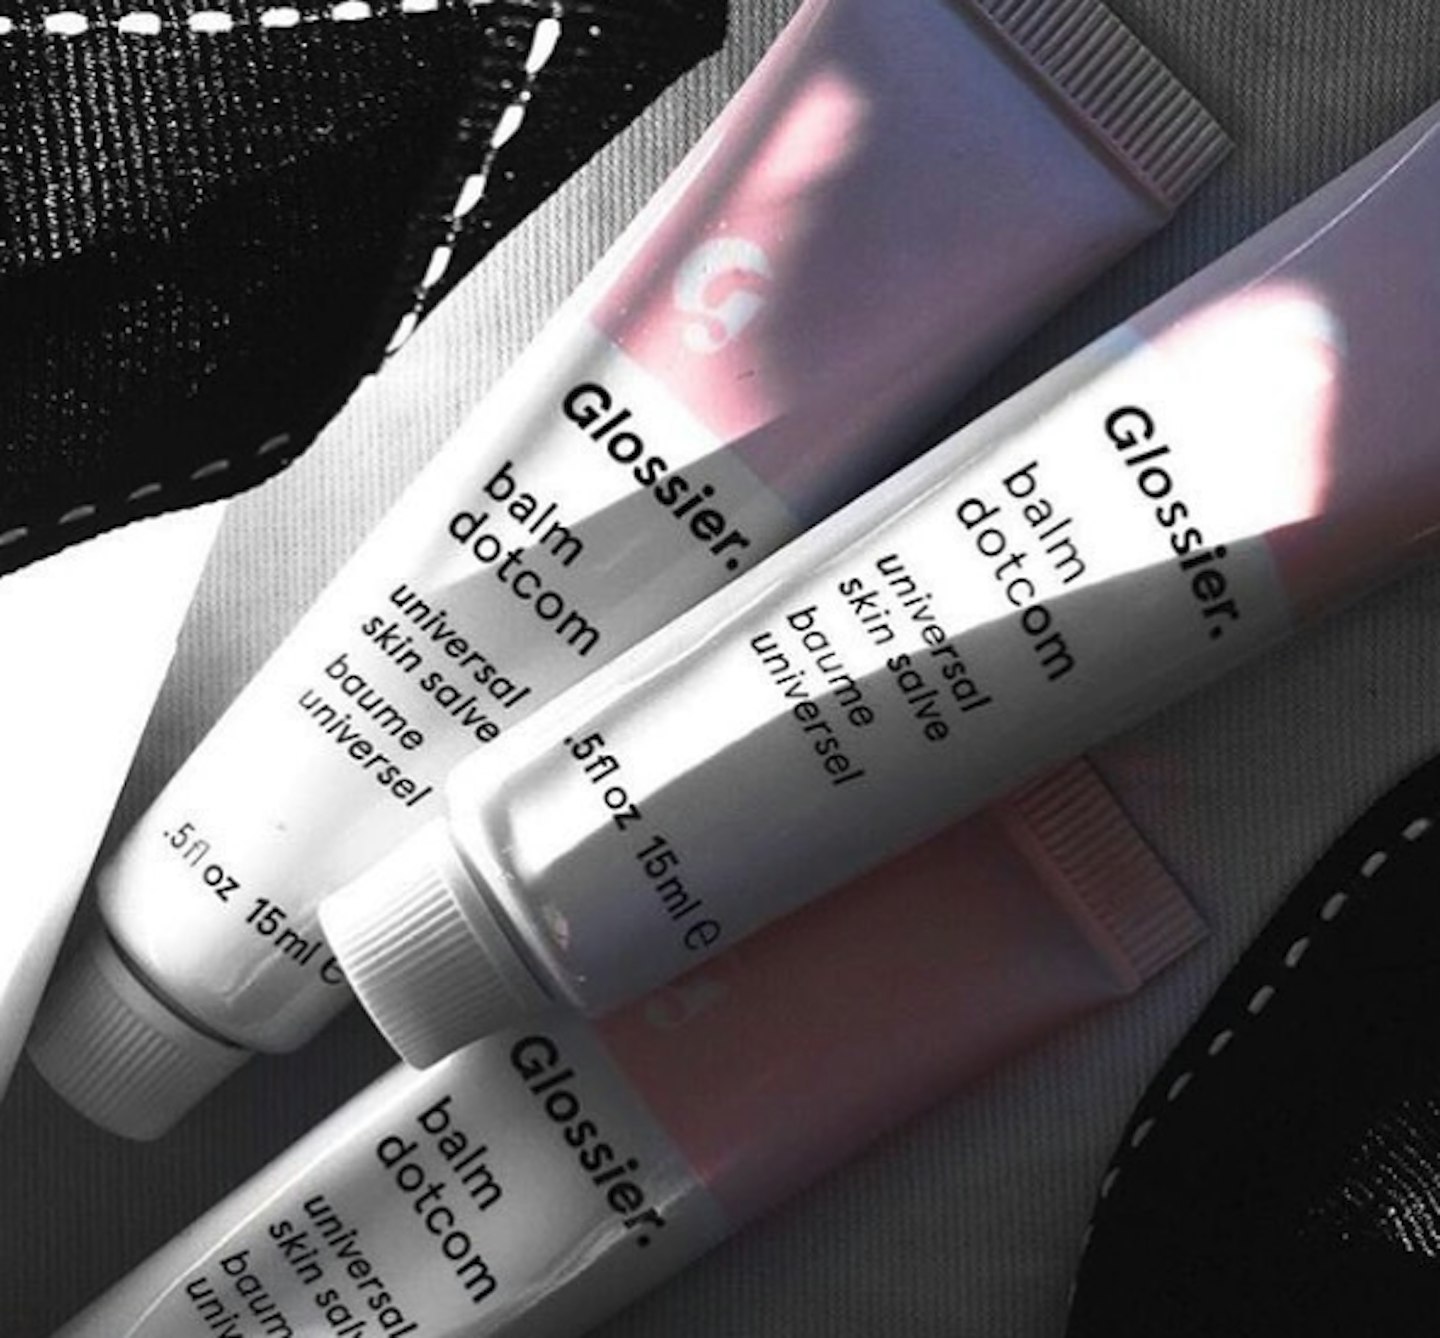 The Best Products From Glossier UK